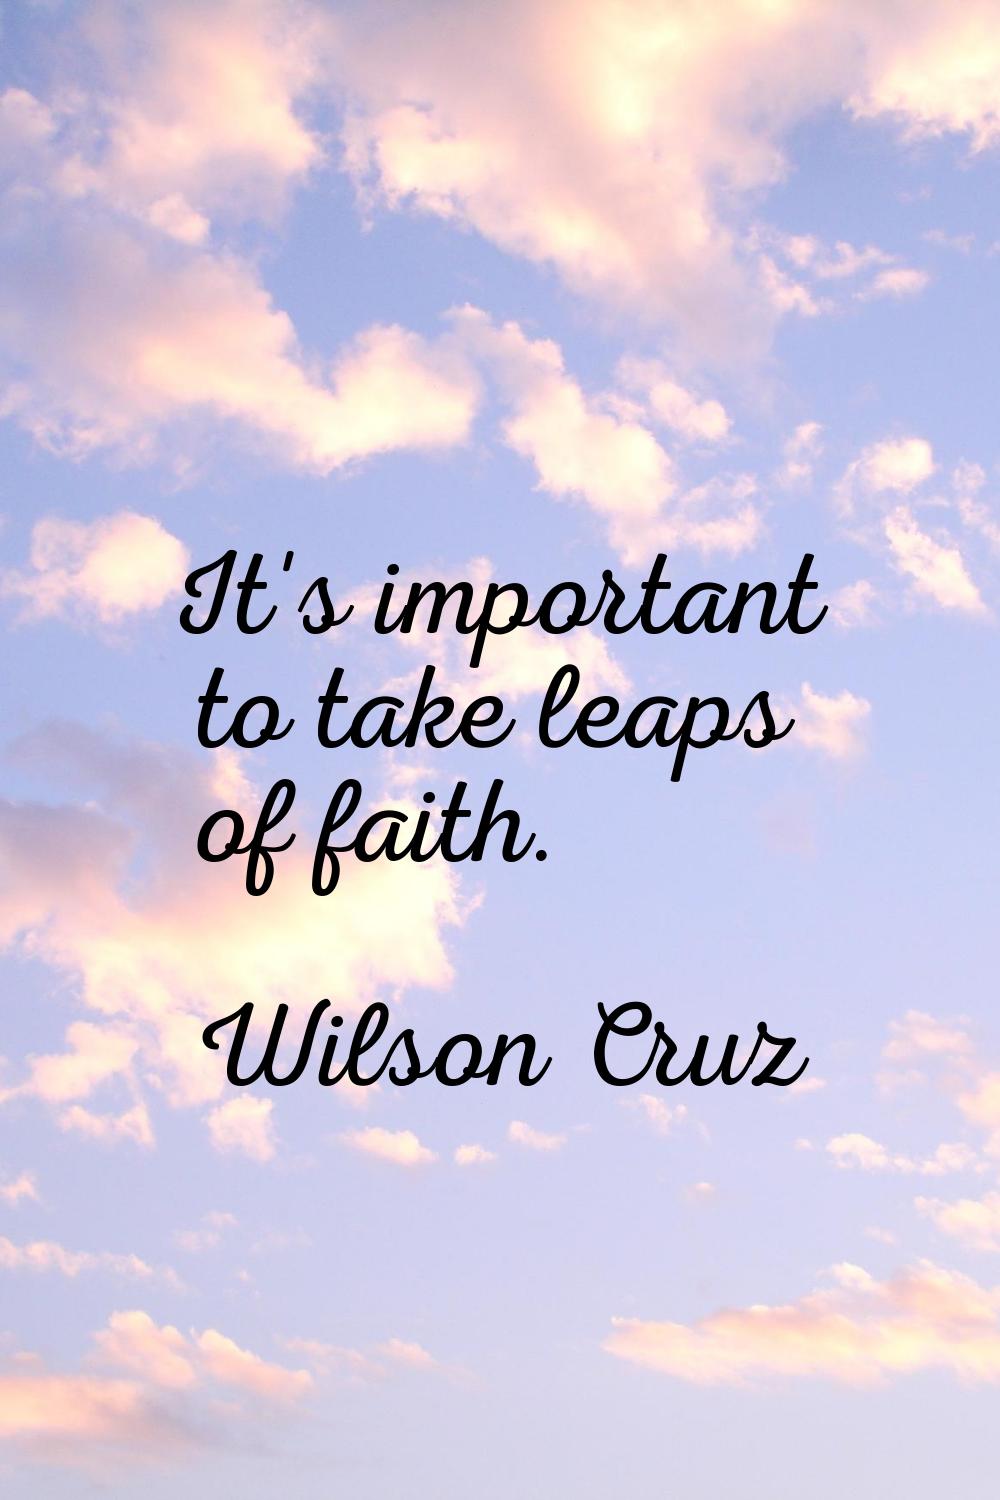 It's important to take leaps of faith.